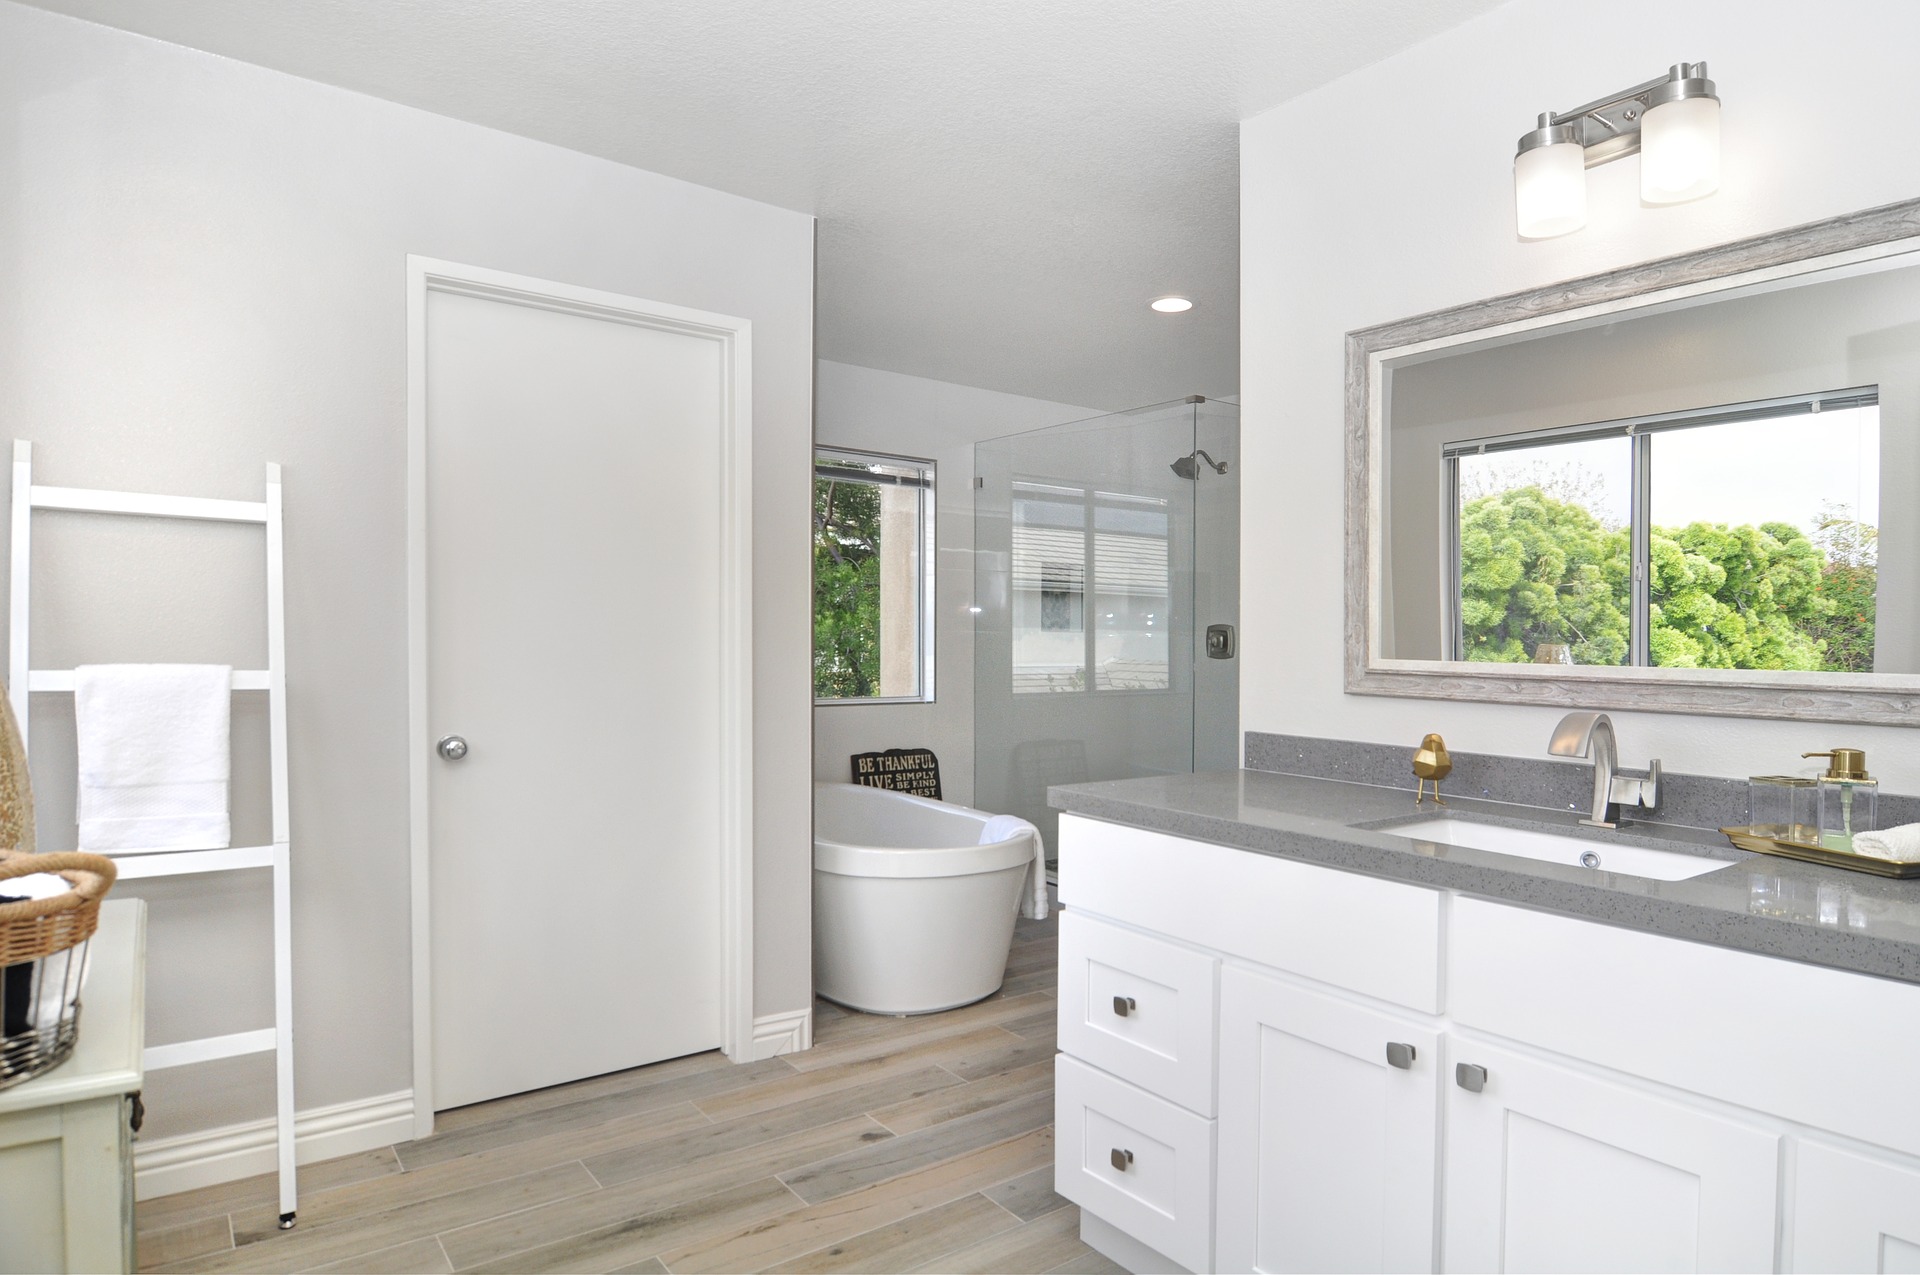 Remodeled bathroom in white and gray on the One Stop Plumbing page for Plumbing Remodeling